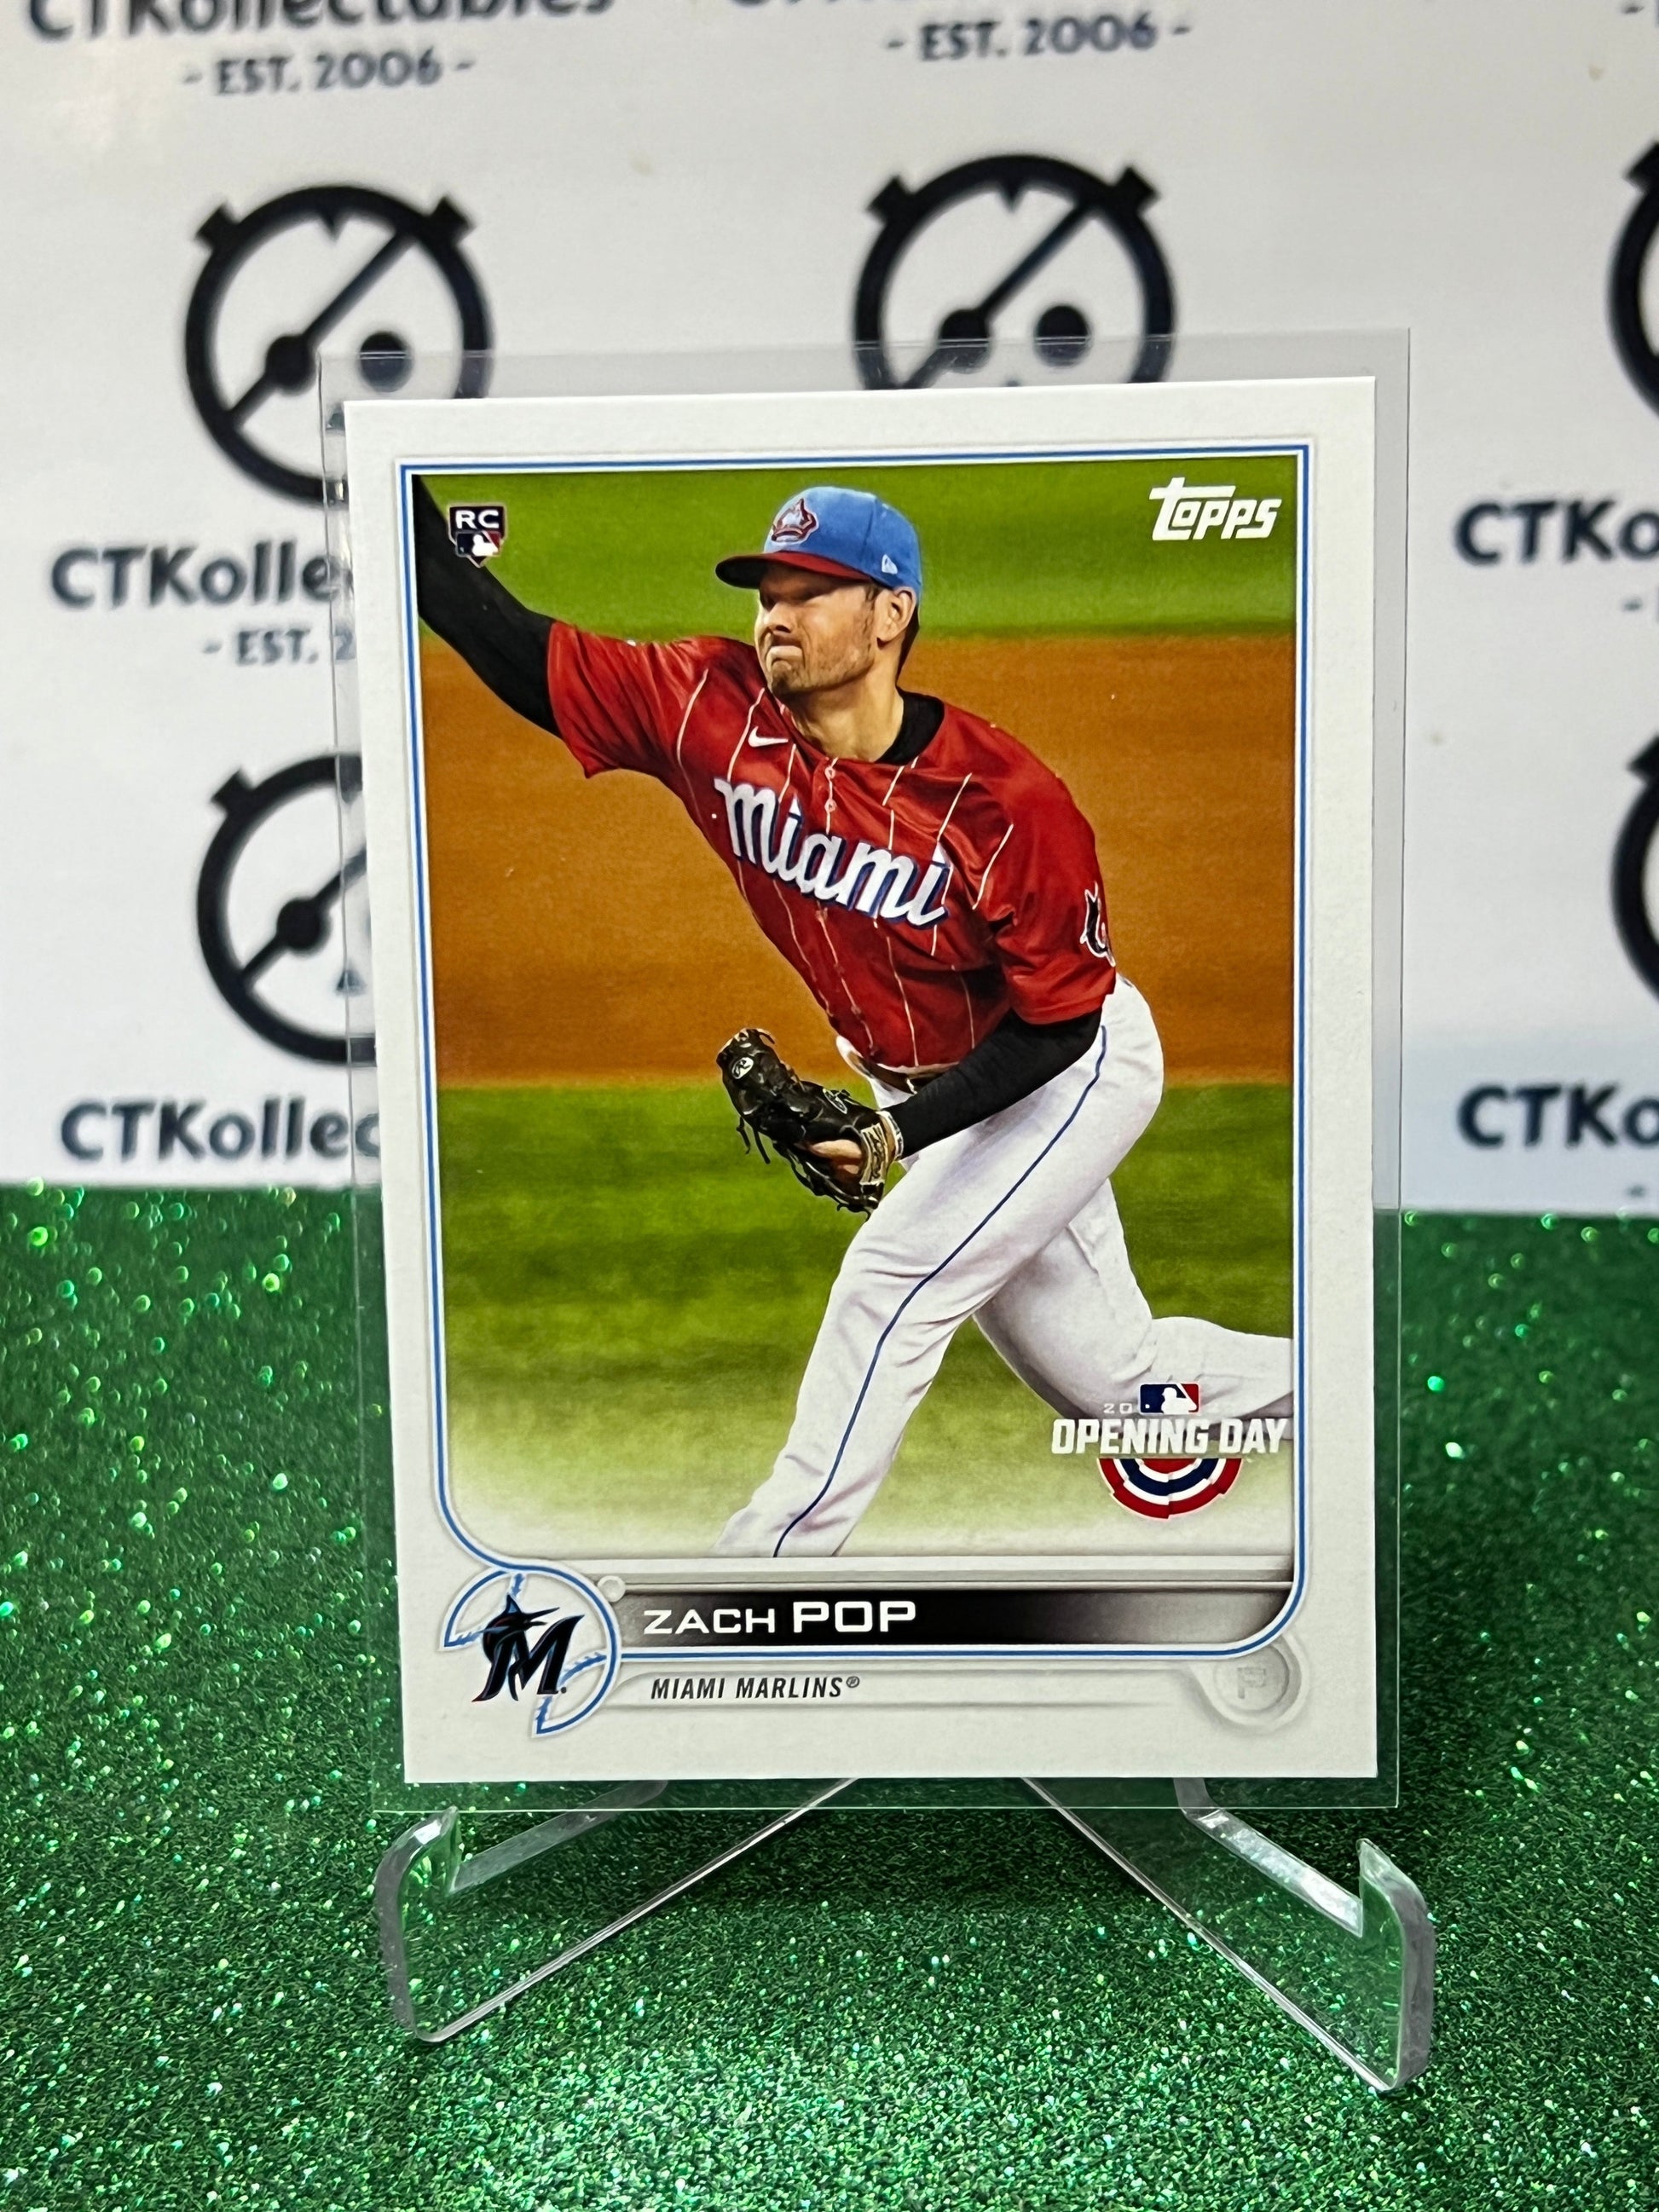 2022 TOPPS OPENING DAY ZACH POP # 204 MIAMI MARLINS BASEBALL –  CTKollectables